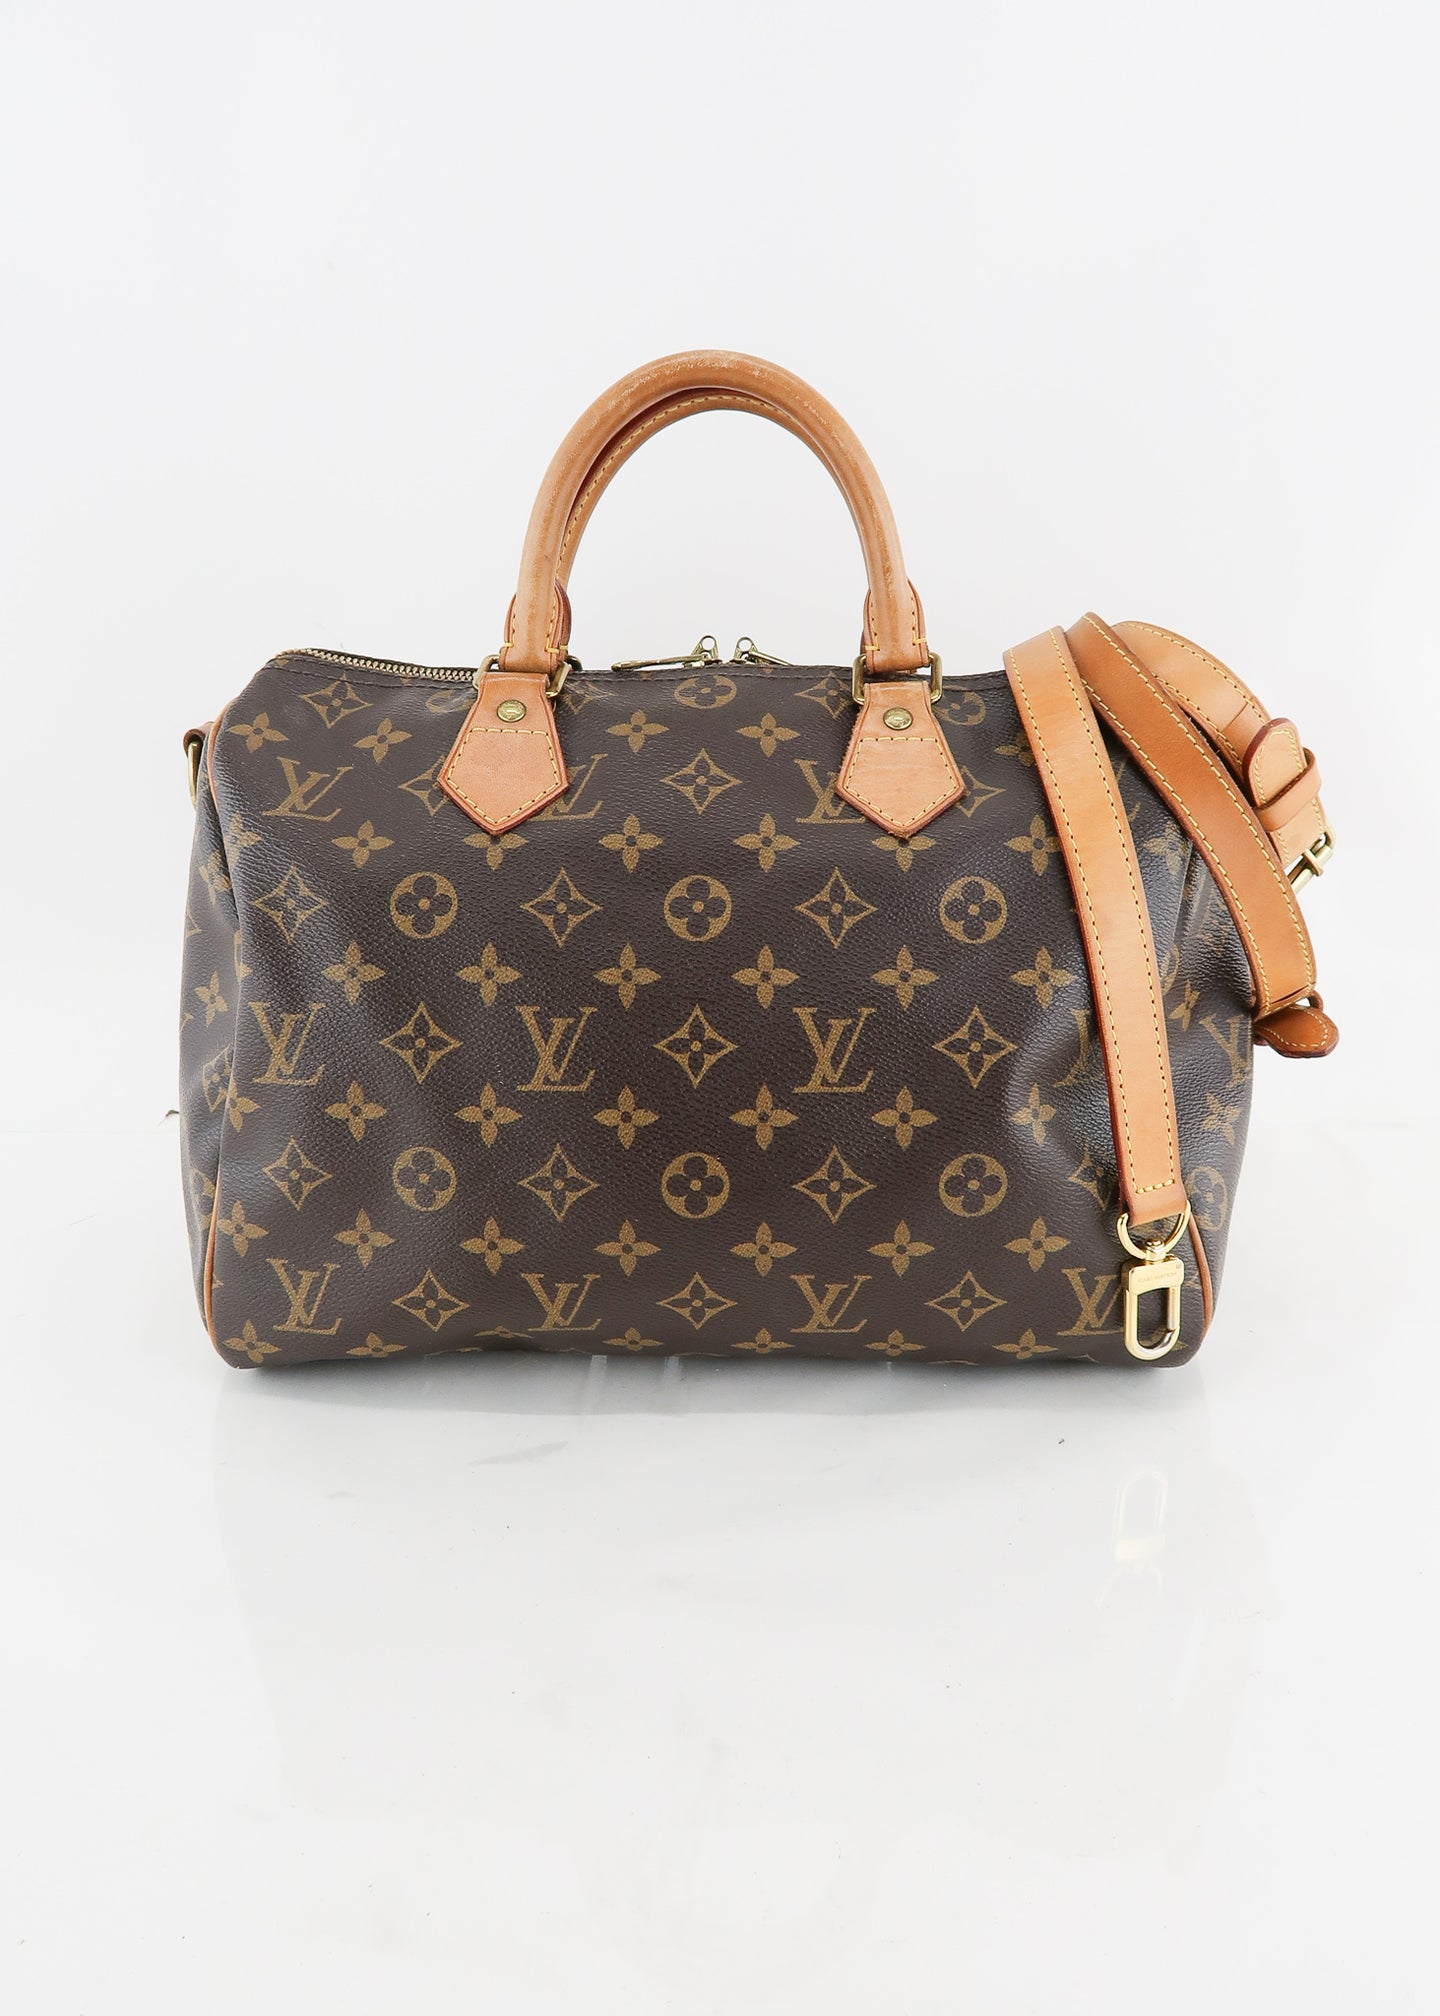 DAY 6 OF 25, THE HISTORY OF LOUIS VUITTON SPEEDY